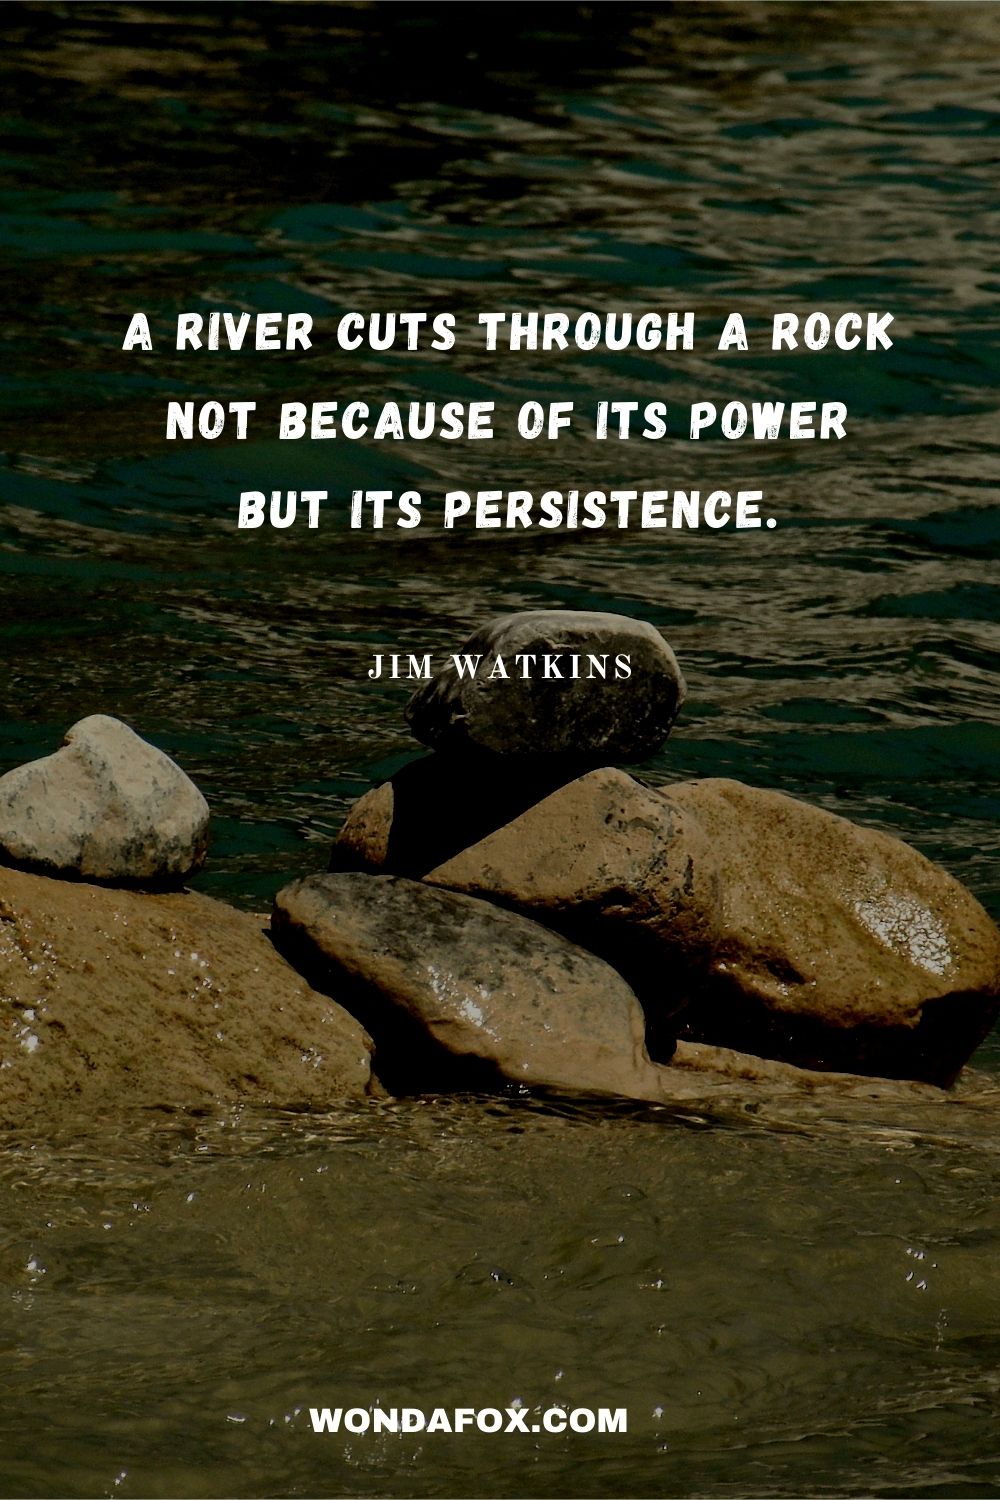 A river cuts through a rock not because of its power but its persistence.